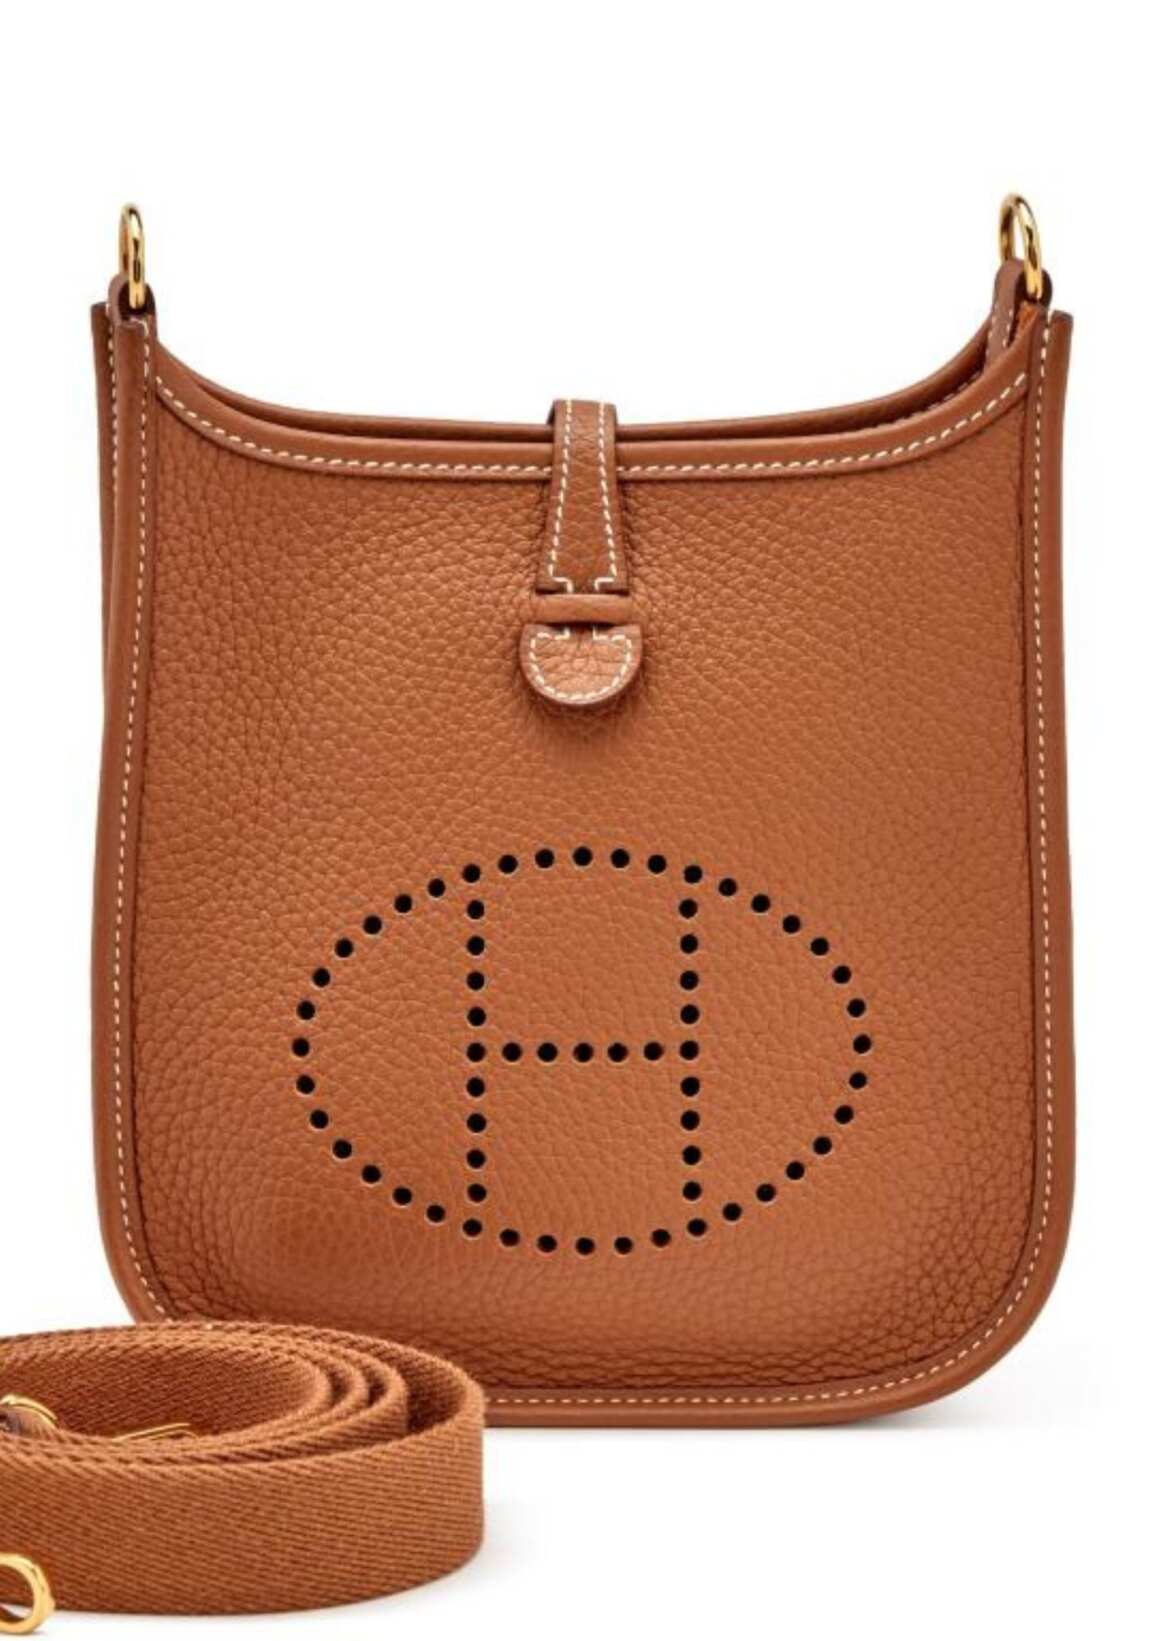 From Birkin to Constance: 7 Hermès Bags to Invest in